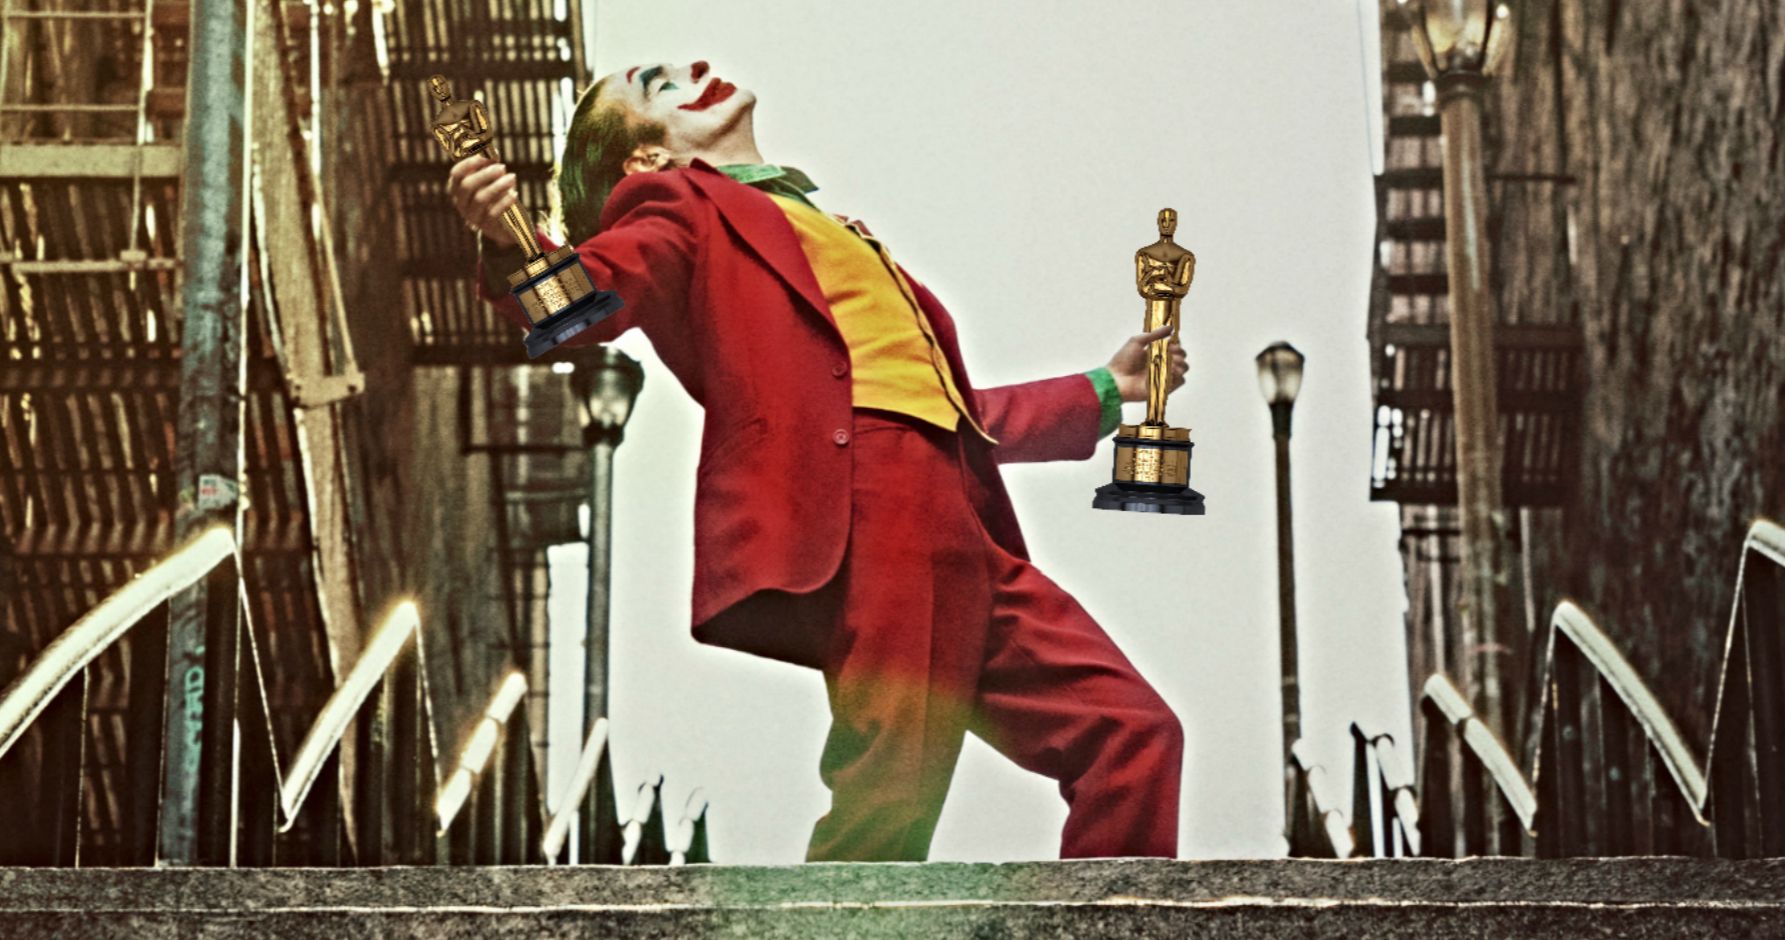 Joker Launches Oscars Campaign, Does It Really Have a Shot at Best Picture?